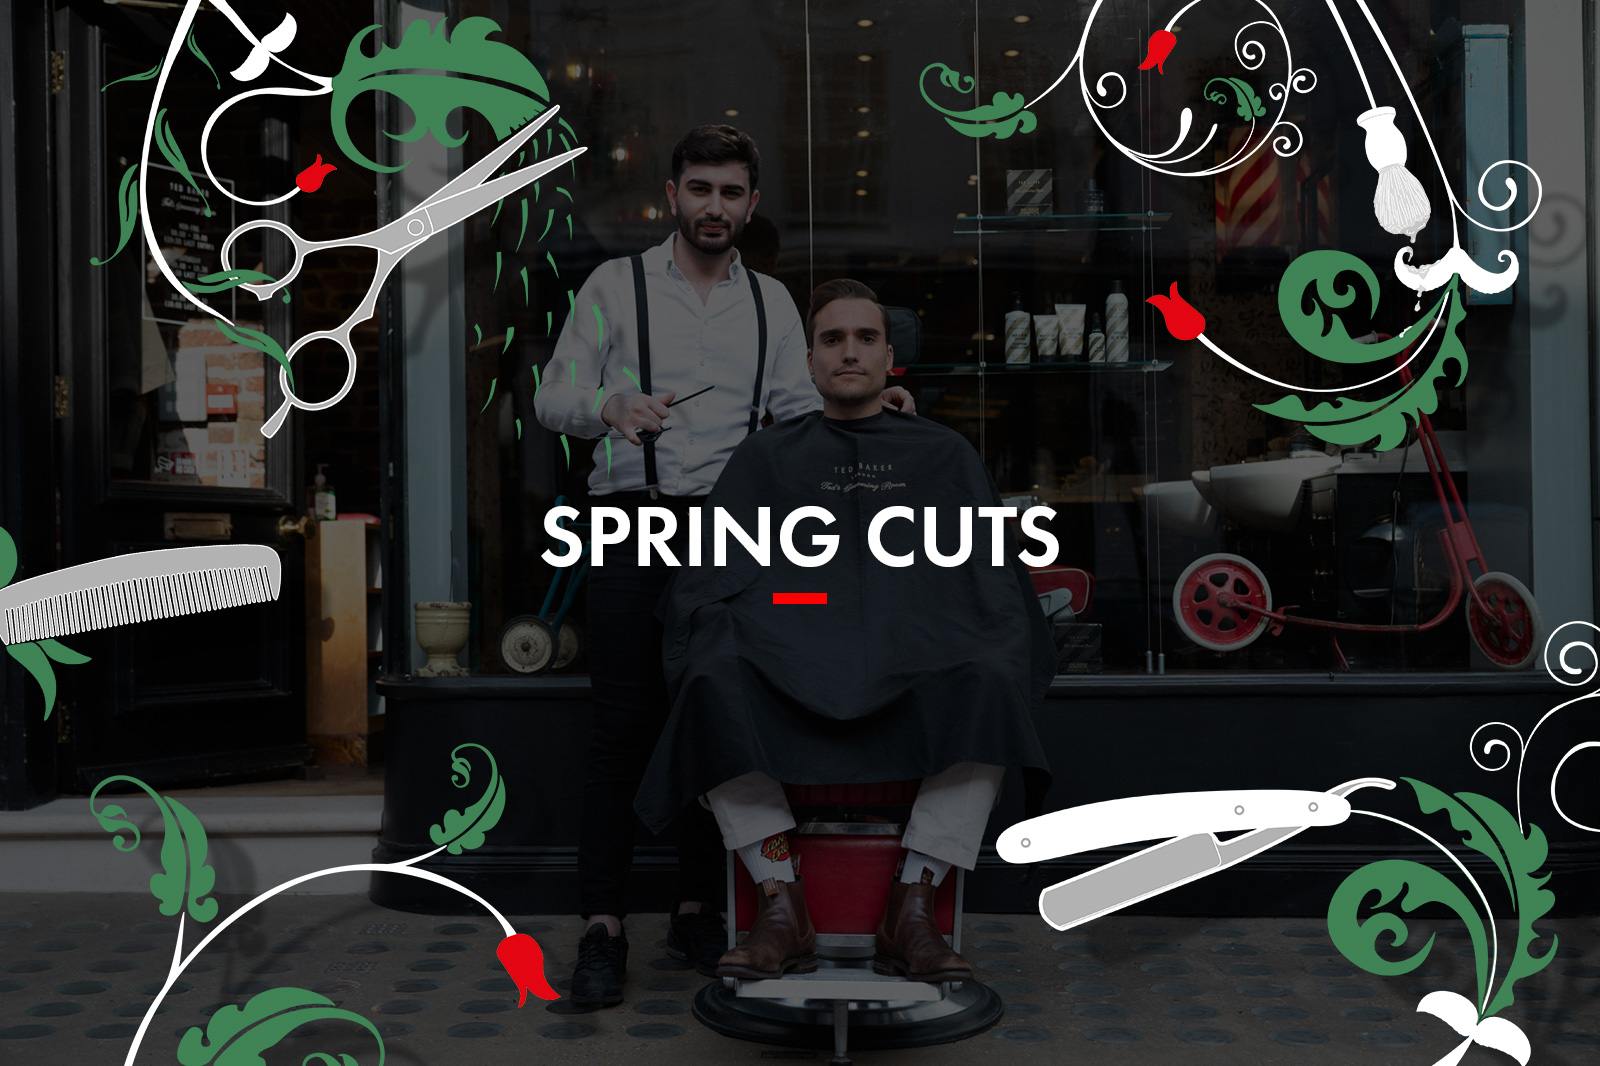 Spring has sprung at Ted’s Grooming Room!